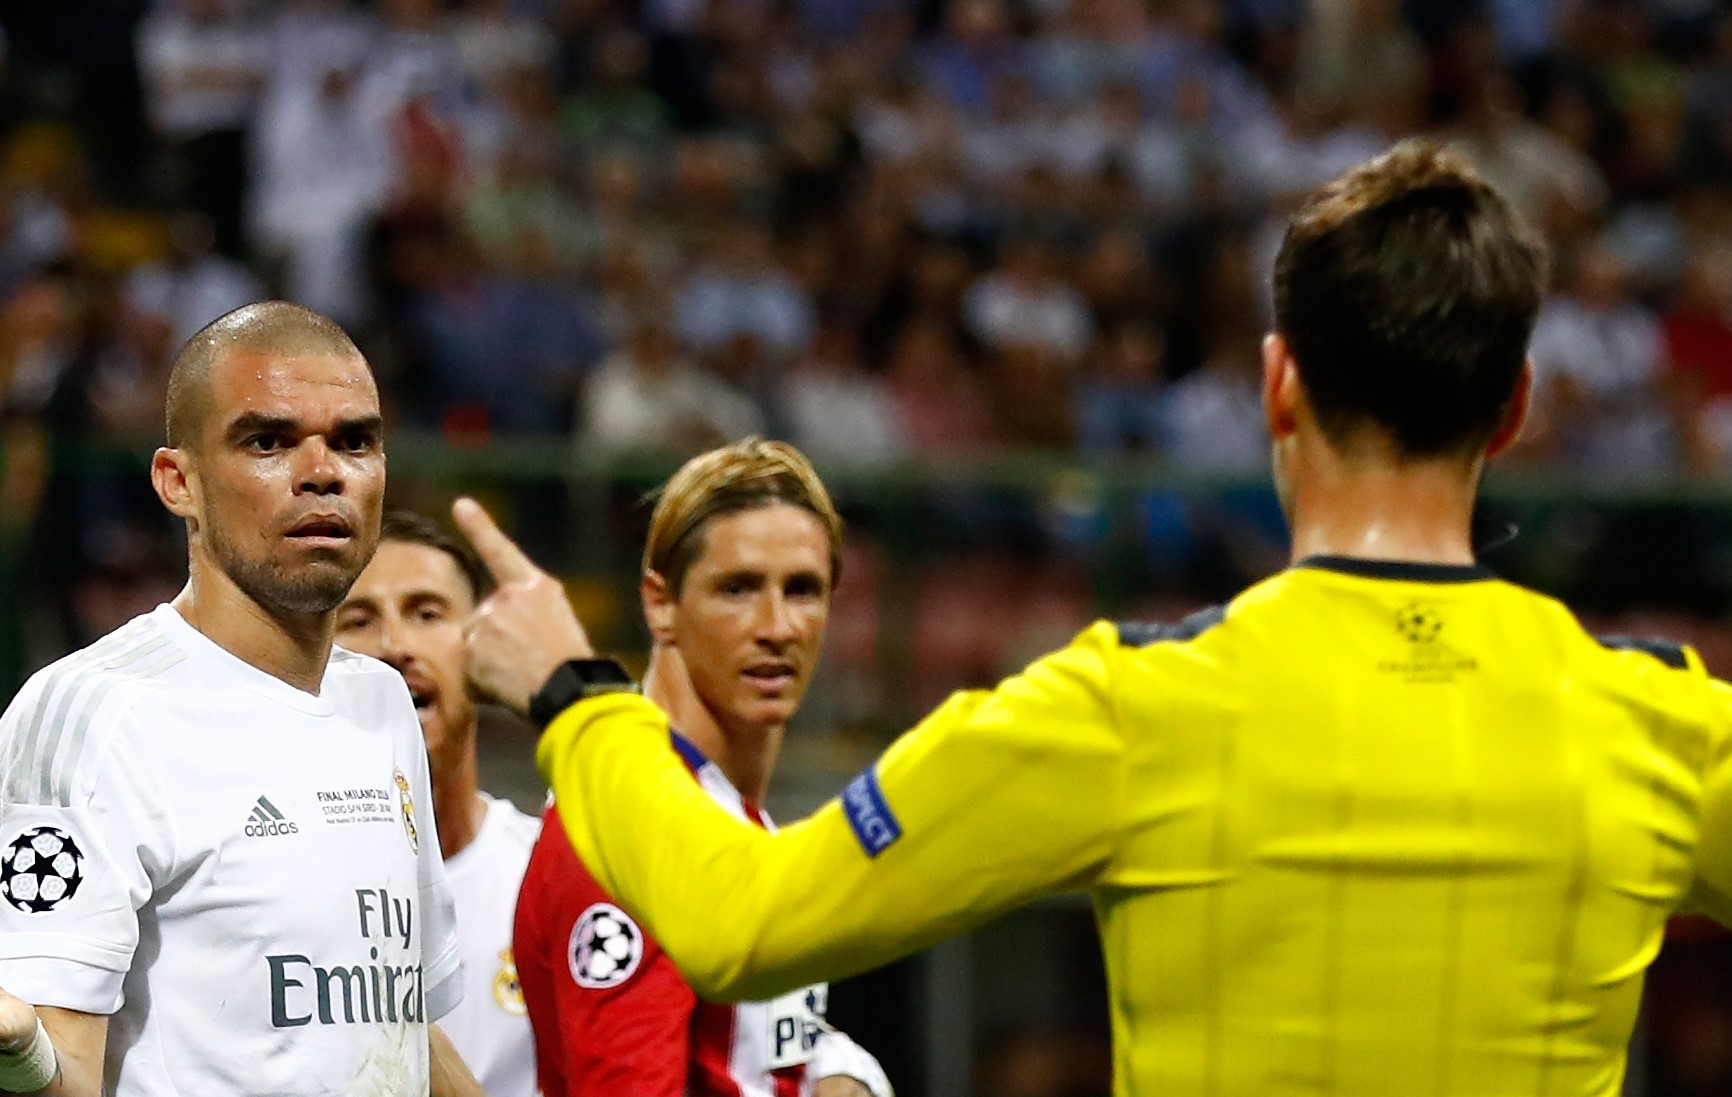 Mark Clattenburg reveals how he silcenced Pepe during Champions League final after incorrect decision